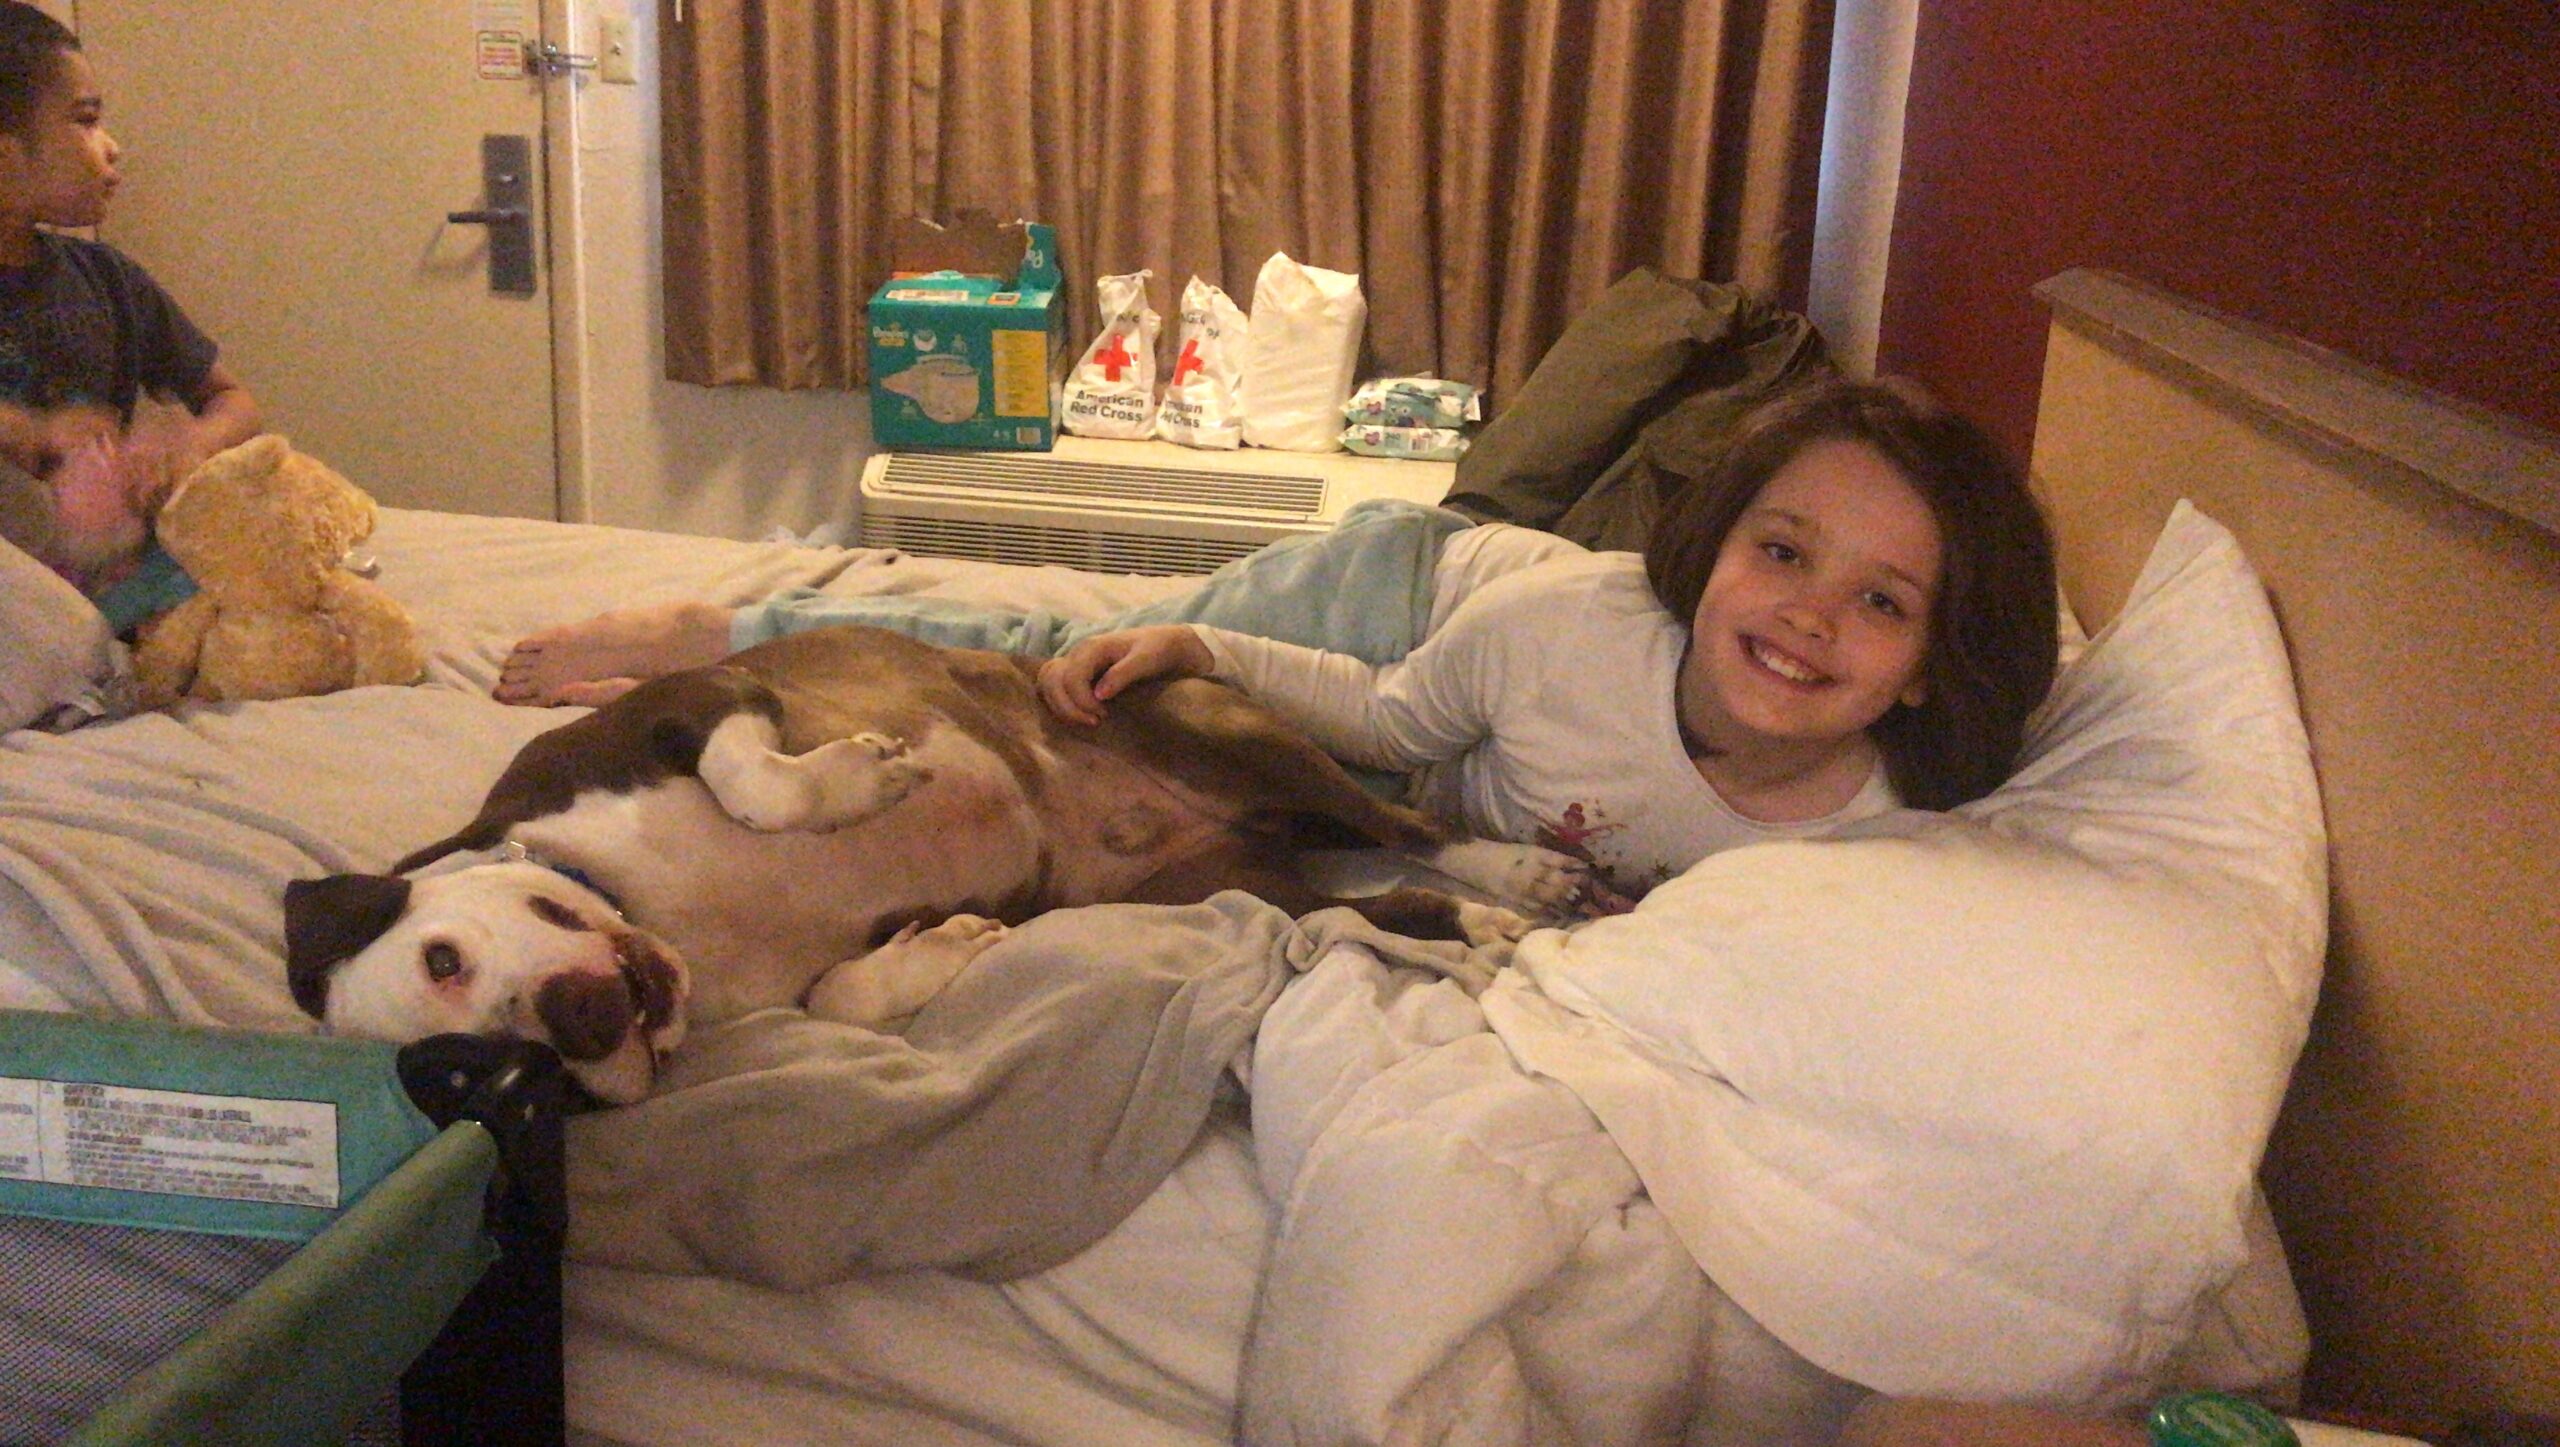 child smiling on the bed with a dog showing his belly